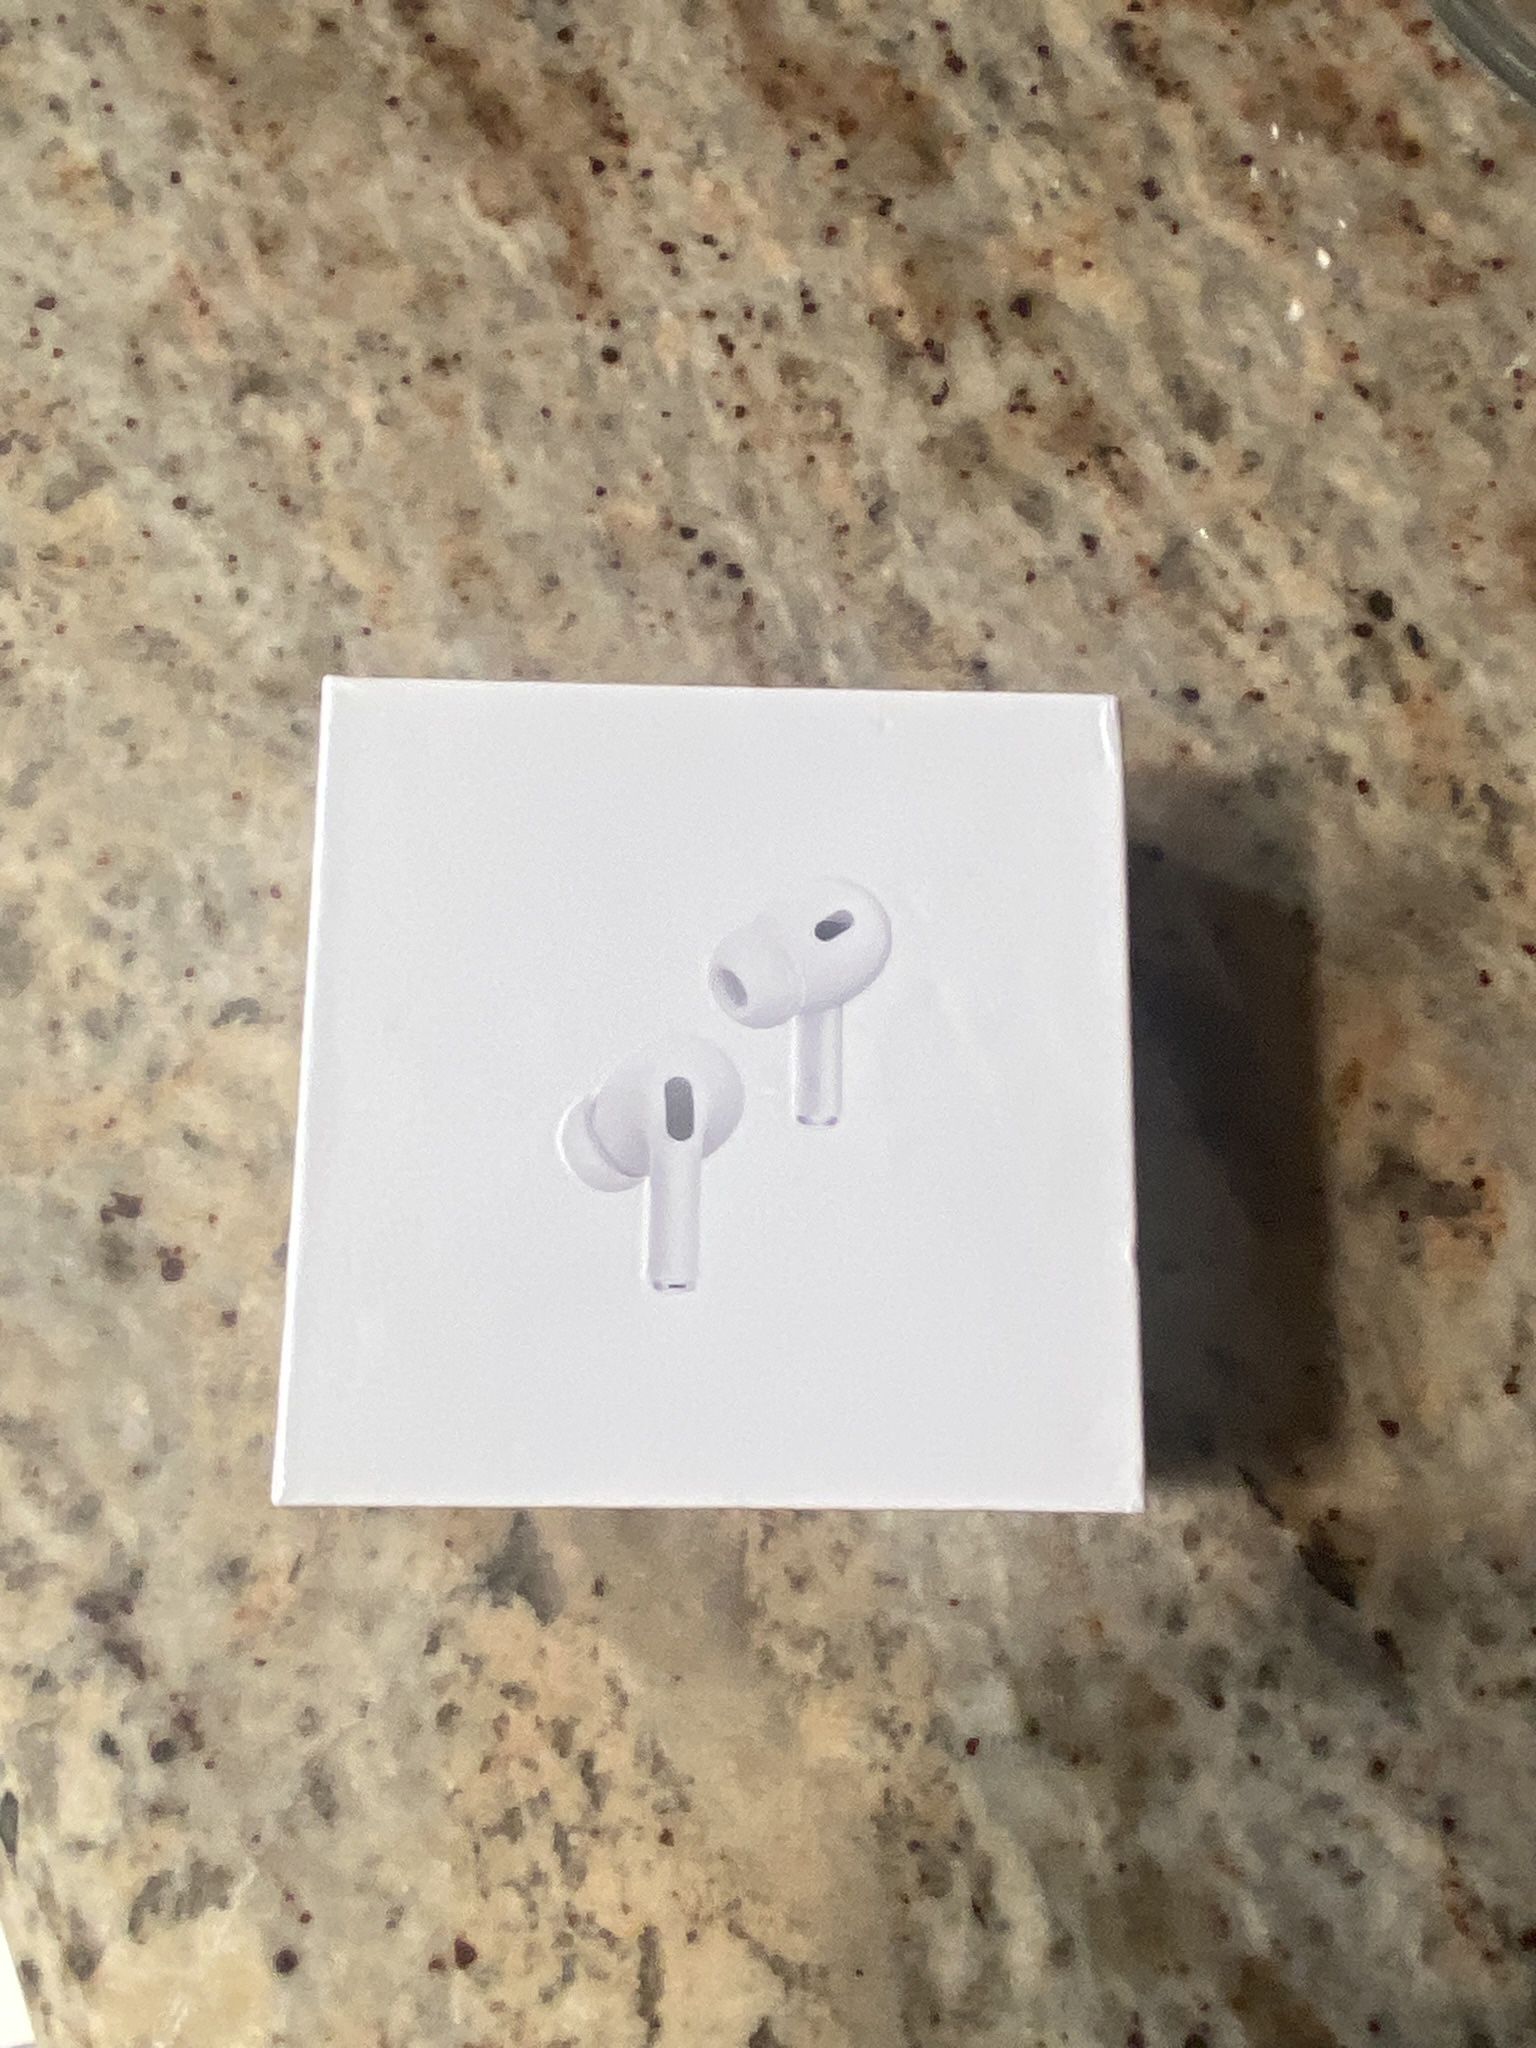 AirPods Pro’s (2nd Gen)